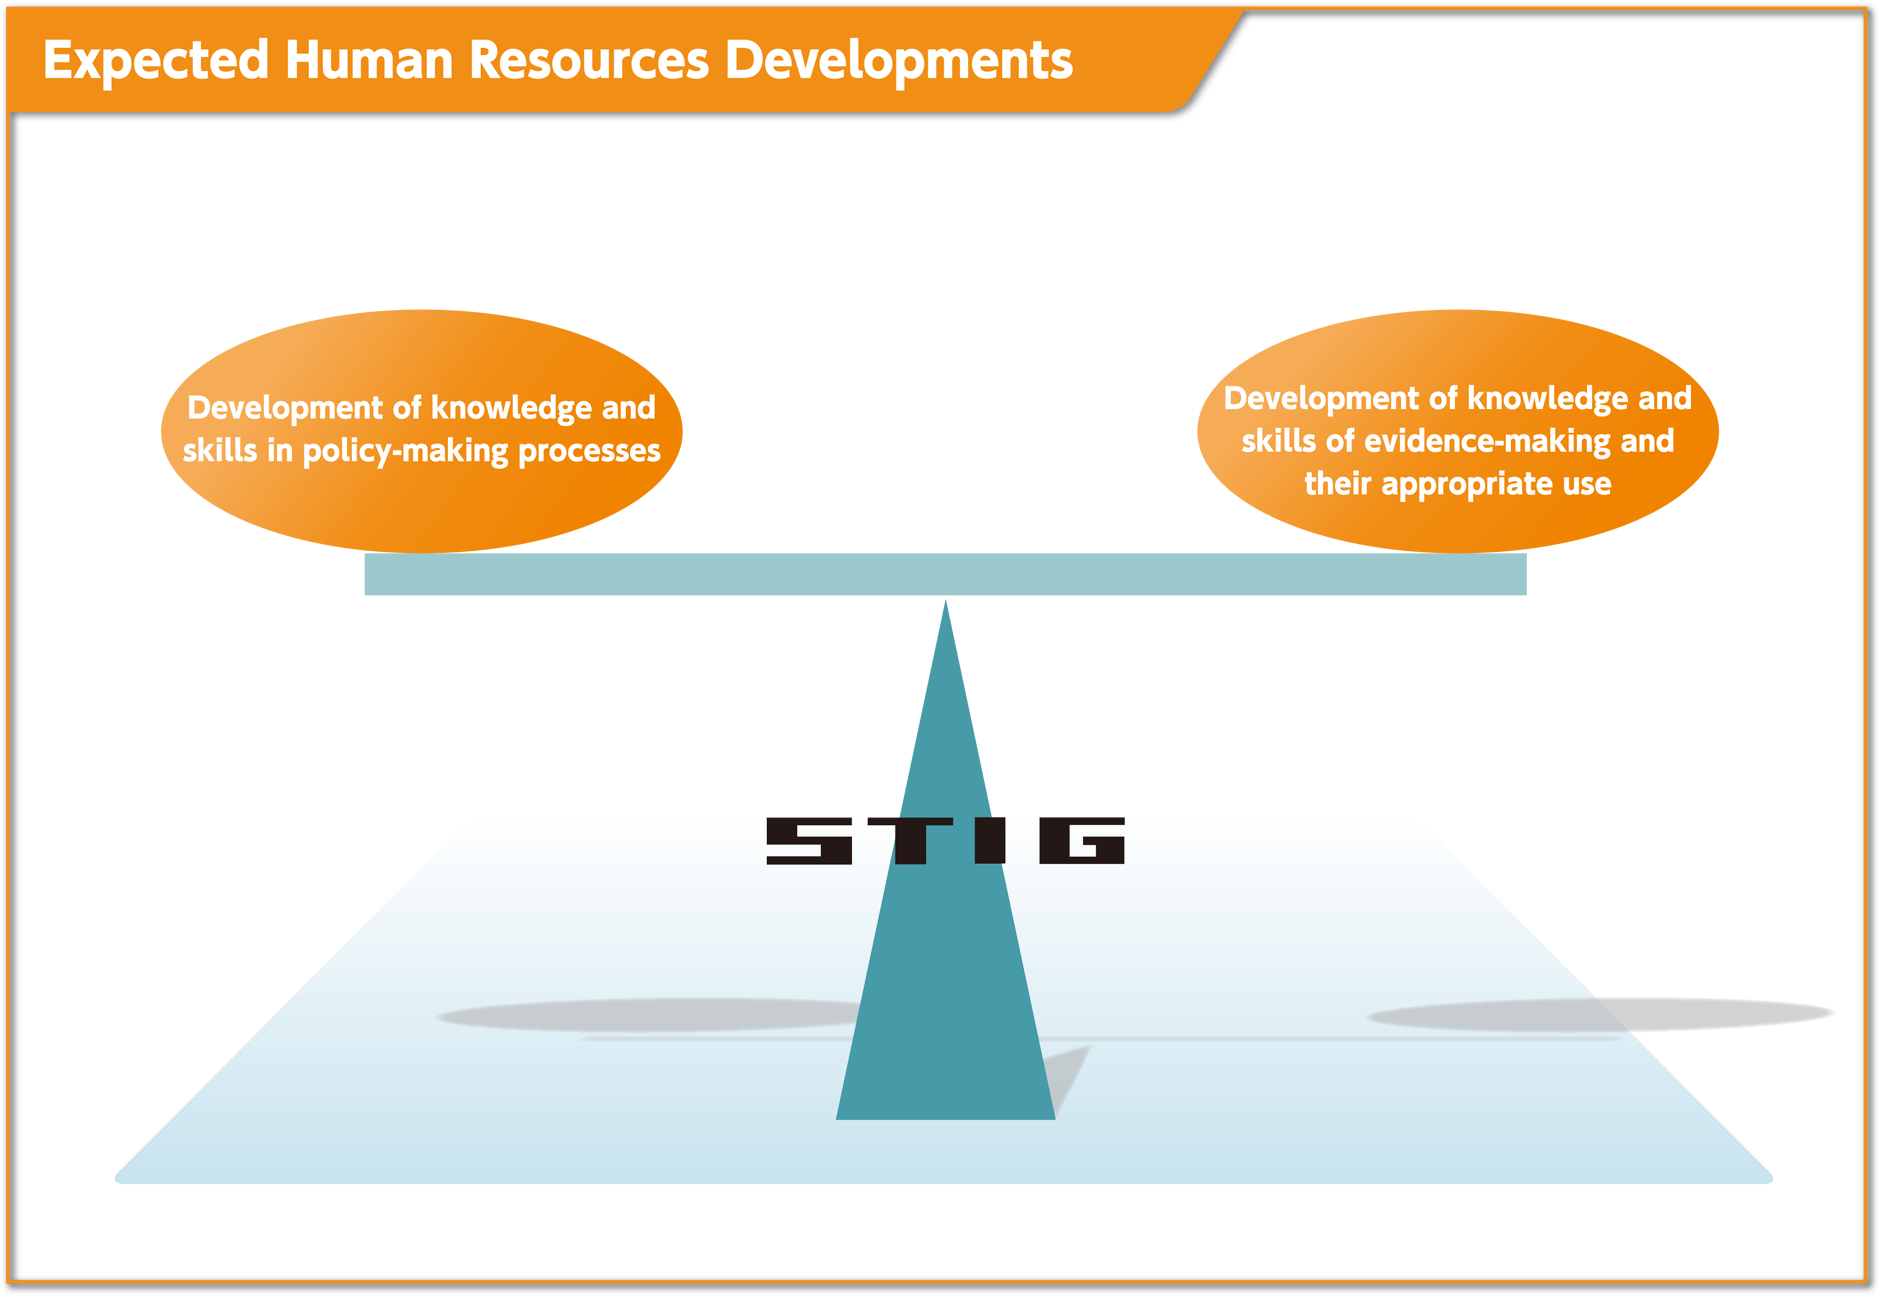 Expected Human Resources Development